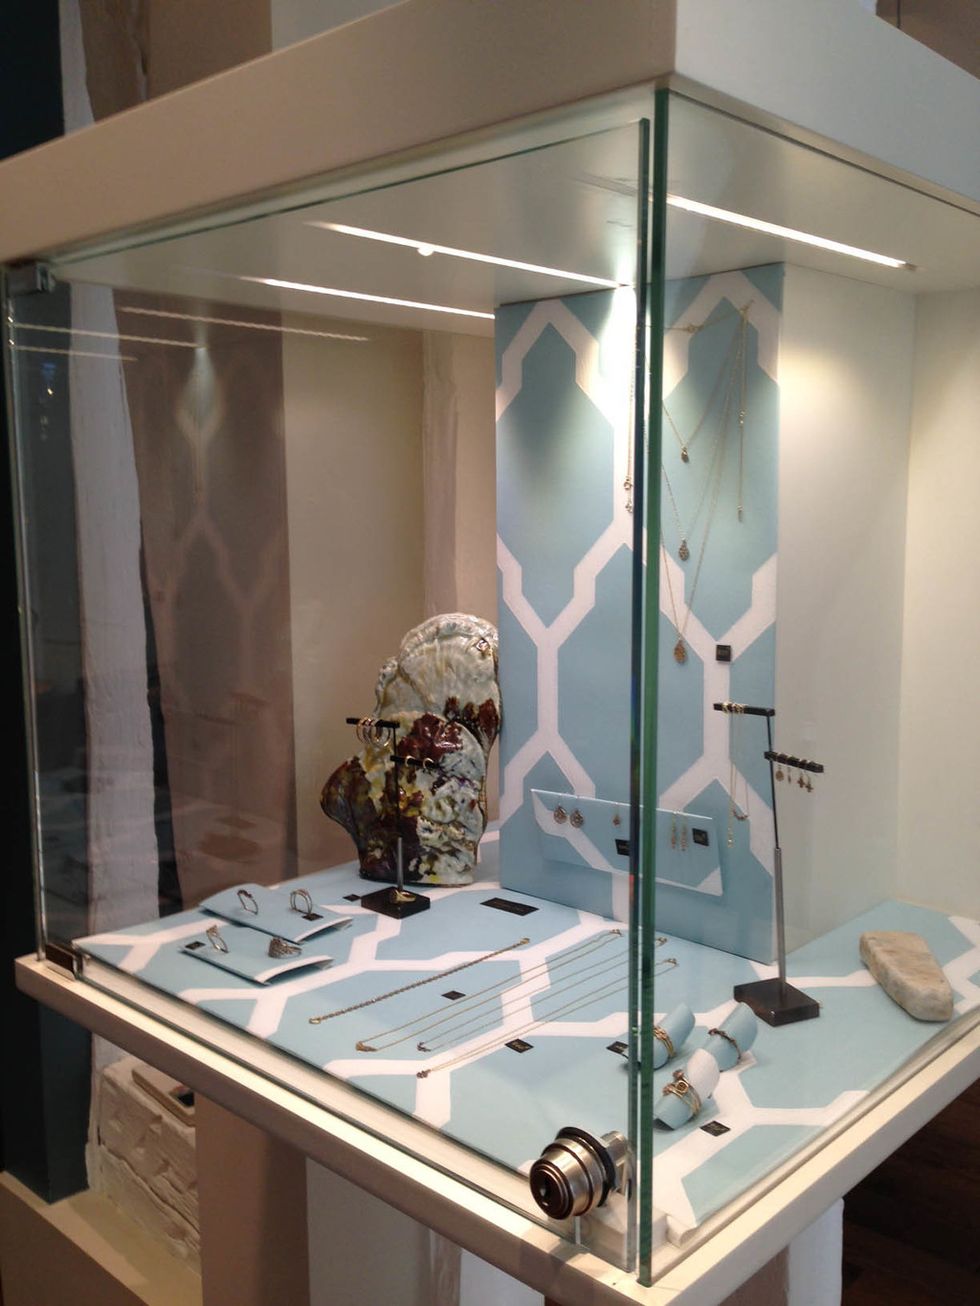 Display case, Museum, Transparent material, Collection, Tourist attraction, Anthropology, Natural material, Display window, 